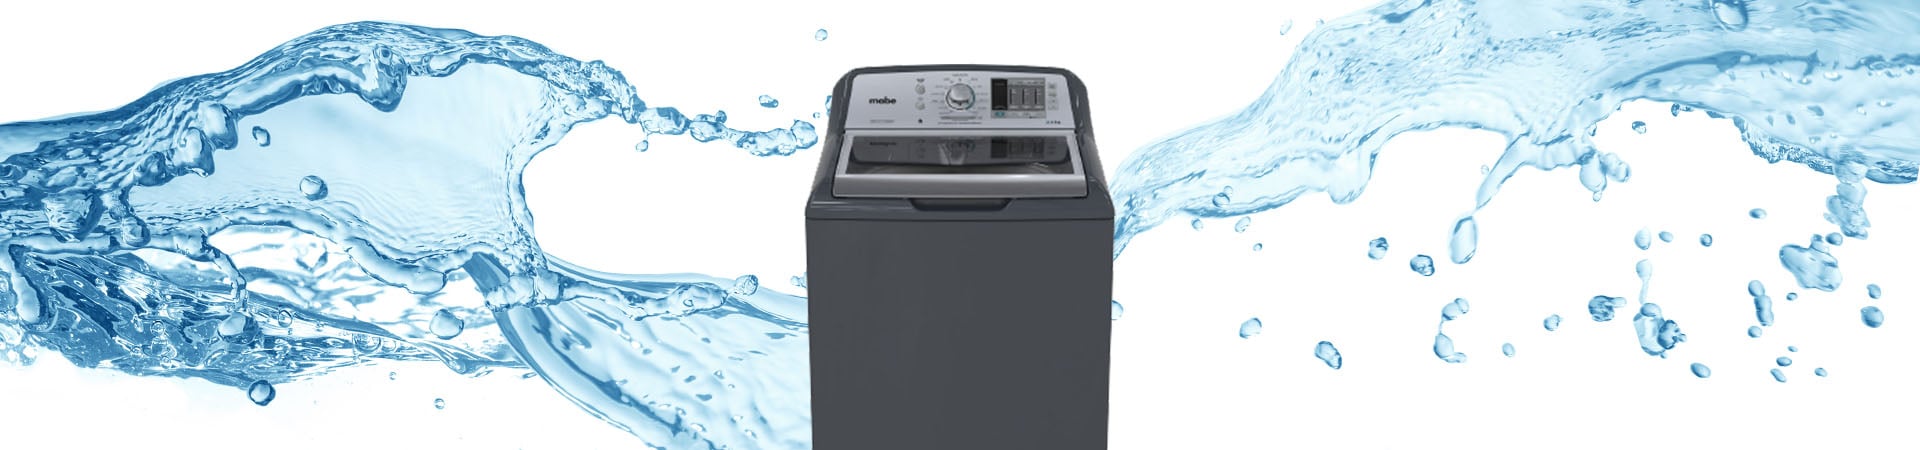 Mabe's Continual Performance Improvement of Washing Machines with a Multi-Disciplinary Approach